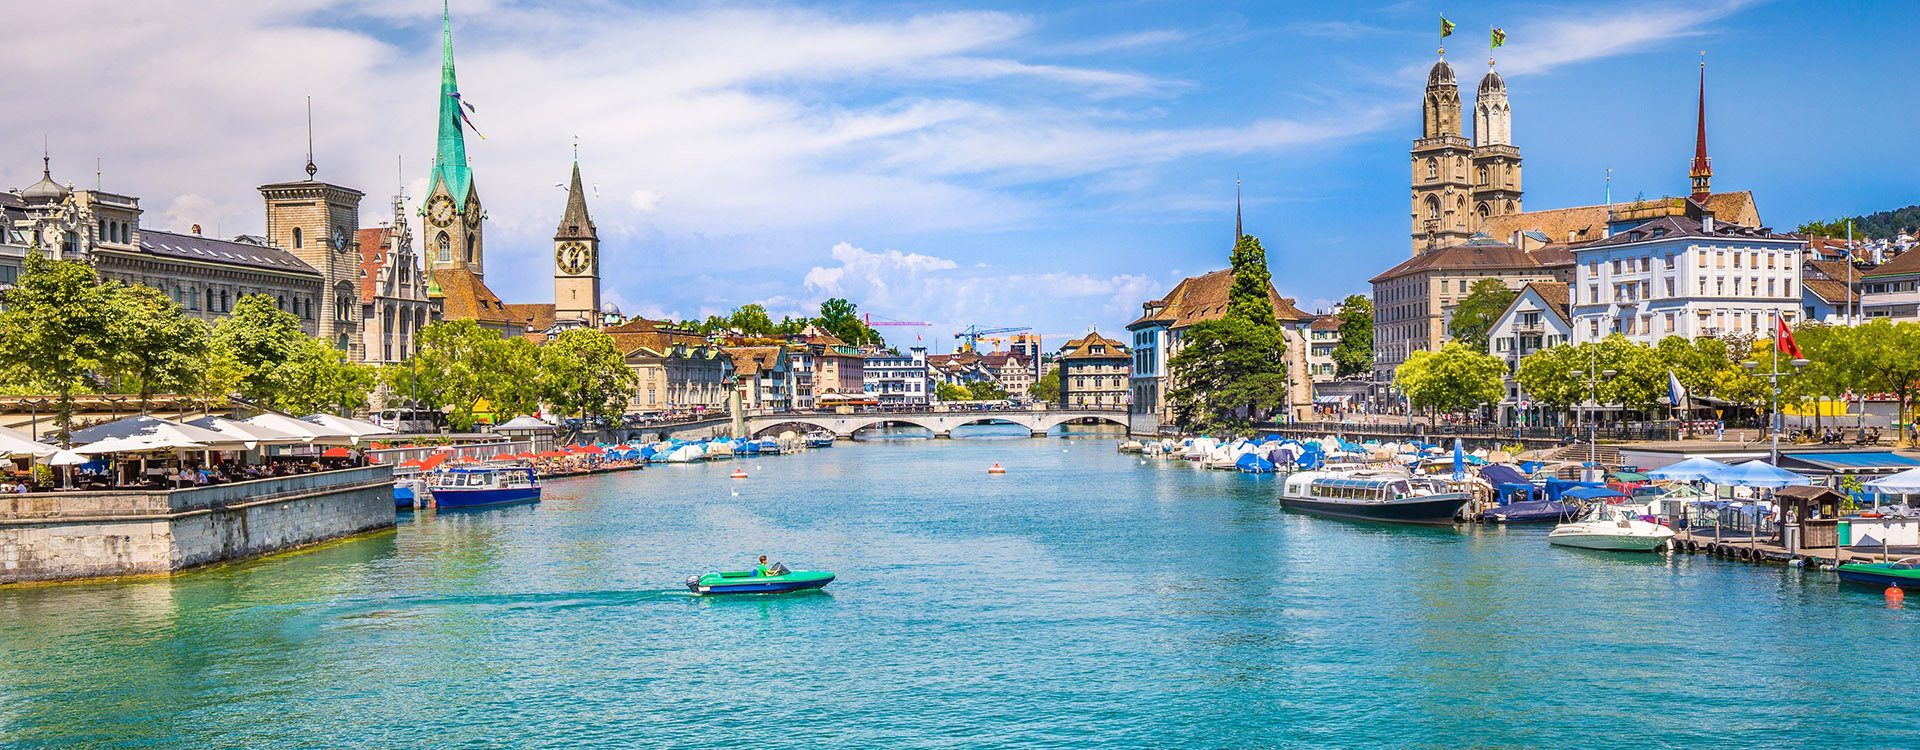 Historic Zurich city center with famous Fraumunster, Grossmunster and St. Peter and river Limmat at Lake Zurich on a sunny day with clouds in summer, Canton of Zurich, Switzerland